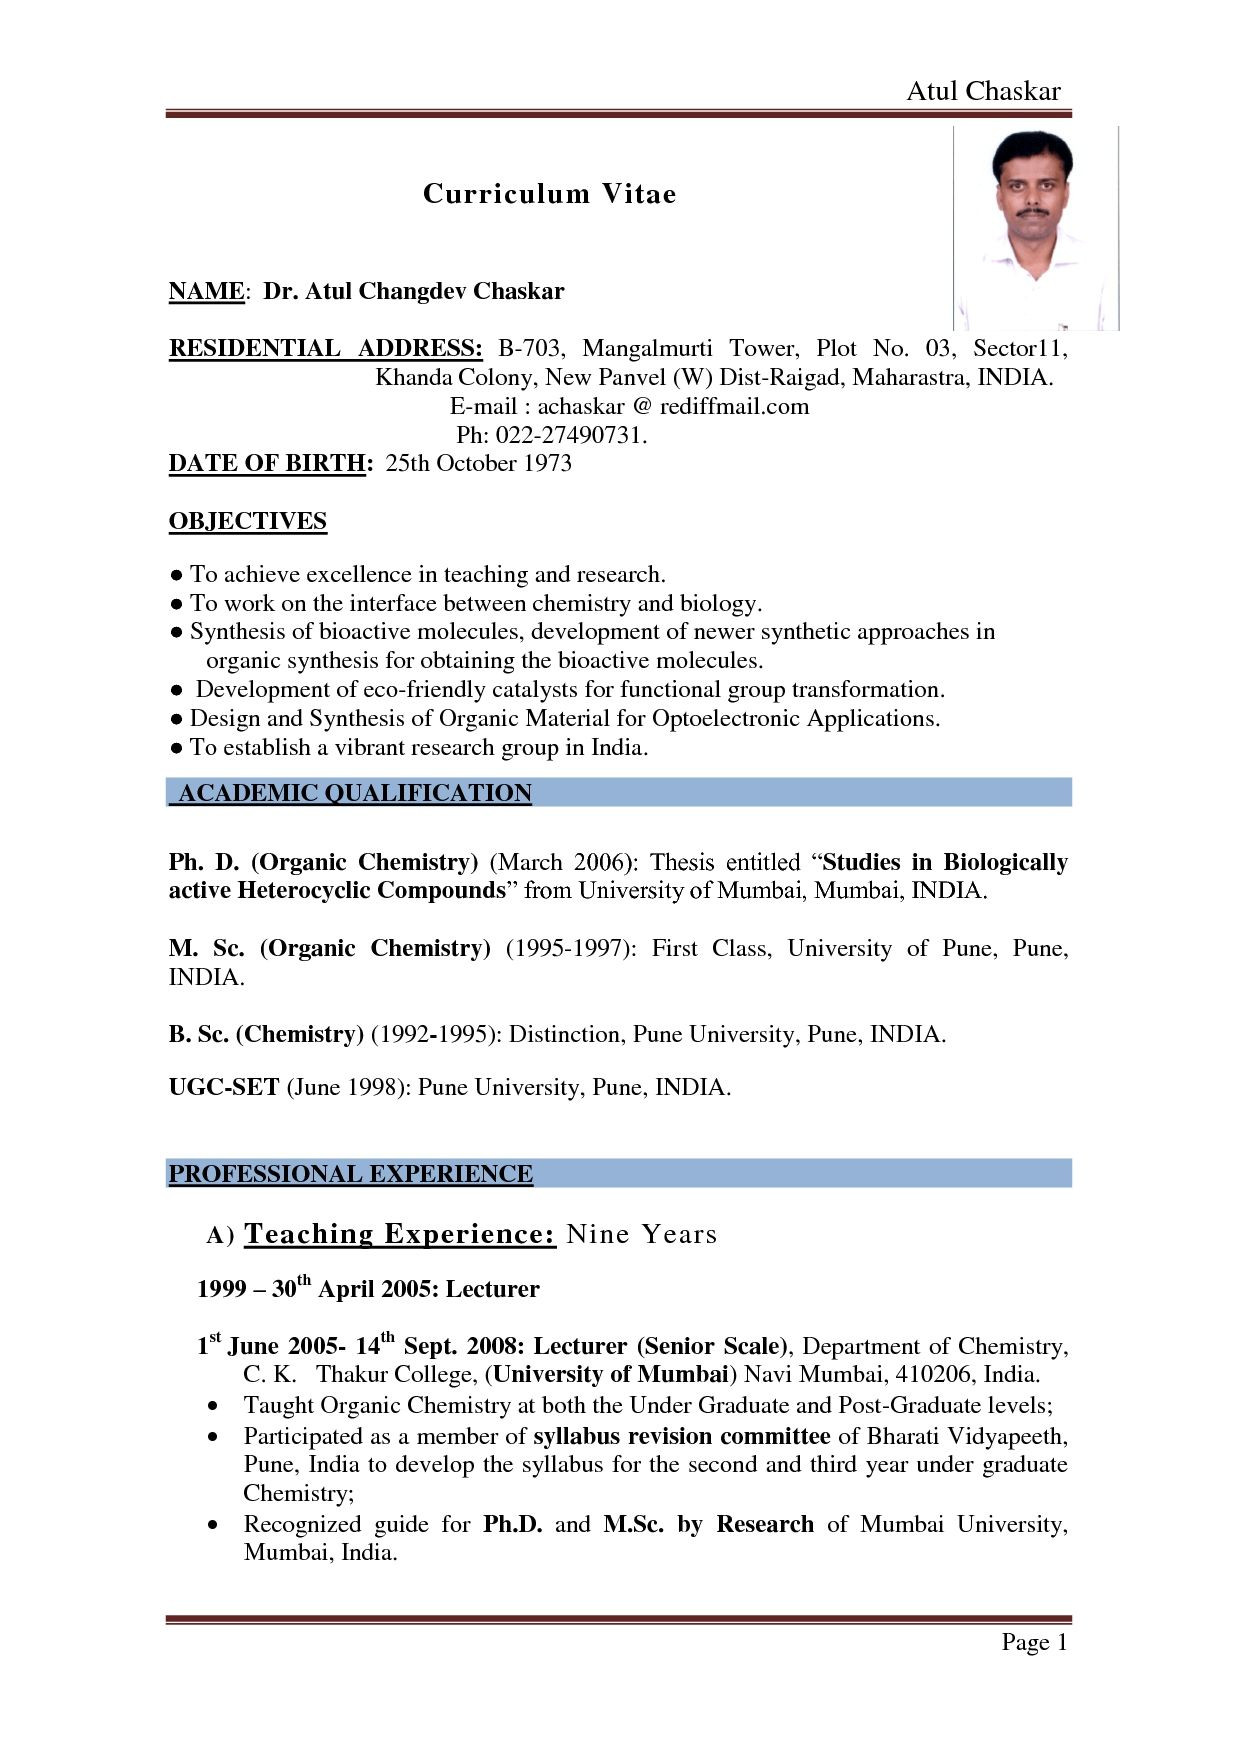 Resume Template for Teachers In India Resume format India – Resume Templates Jobs for Teachers …